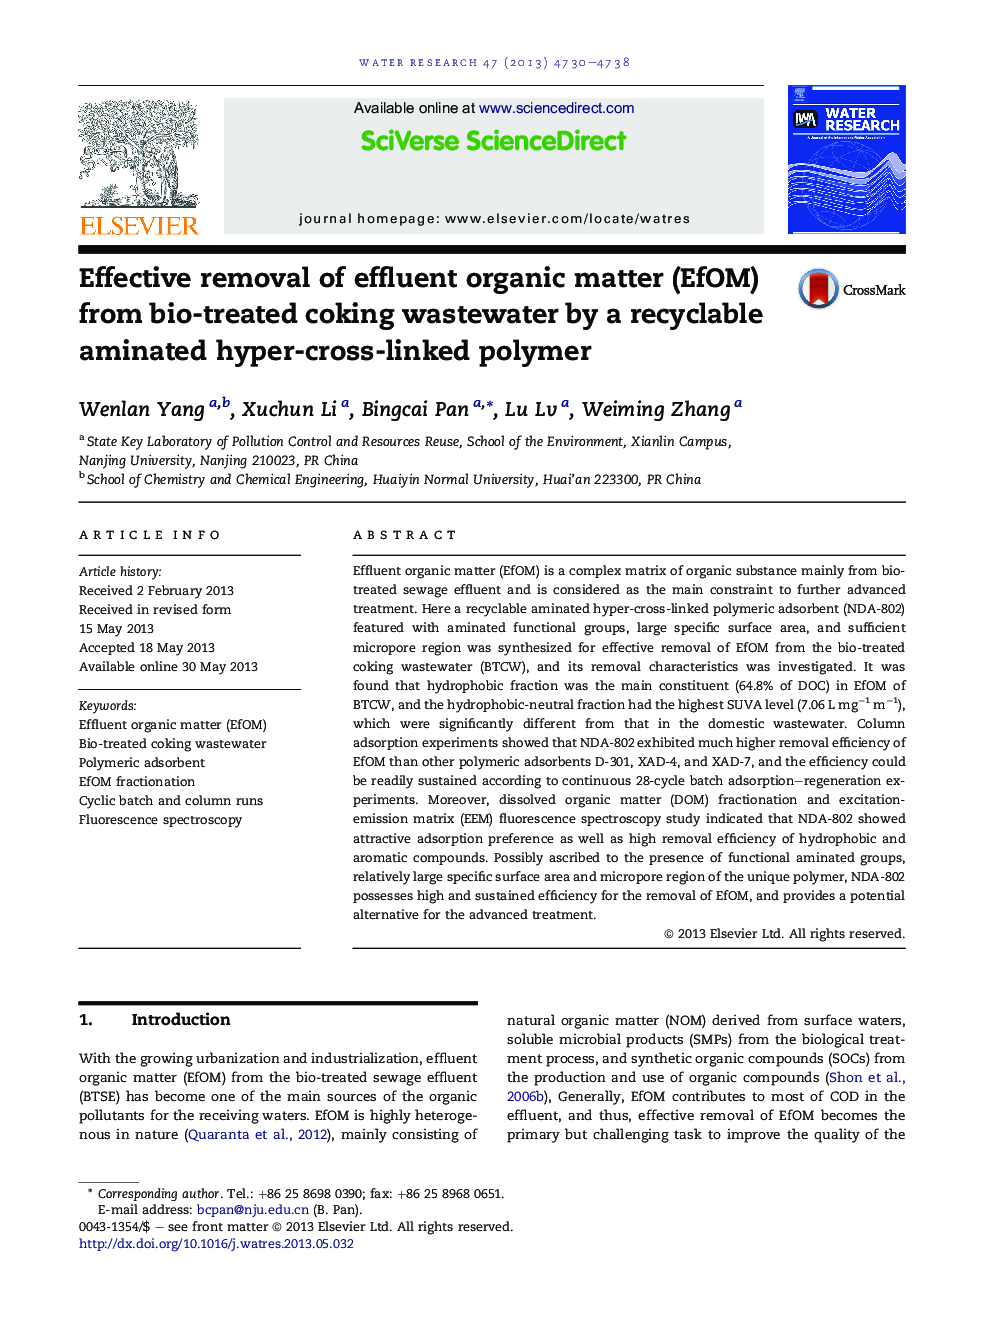 Effective removal of effluent organic matter (EfOM) from bio-treated coking wastewater by a recyclable aminated hyper-cross-linked polymer